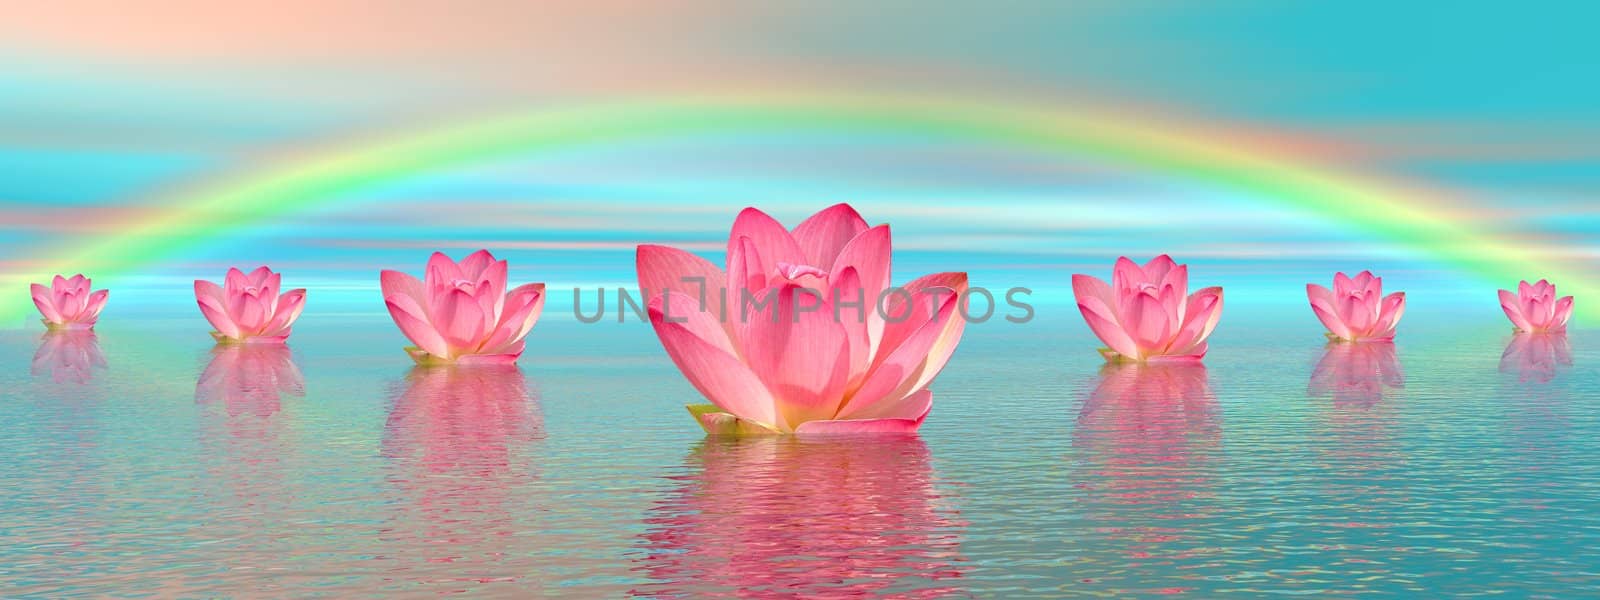 Aligned pink lily flowers on water and under rainbow by beautiful weather